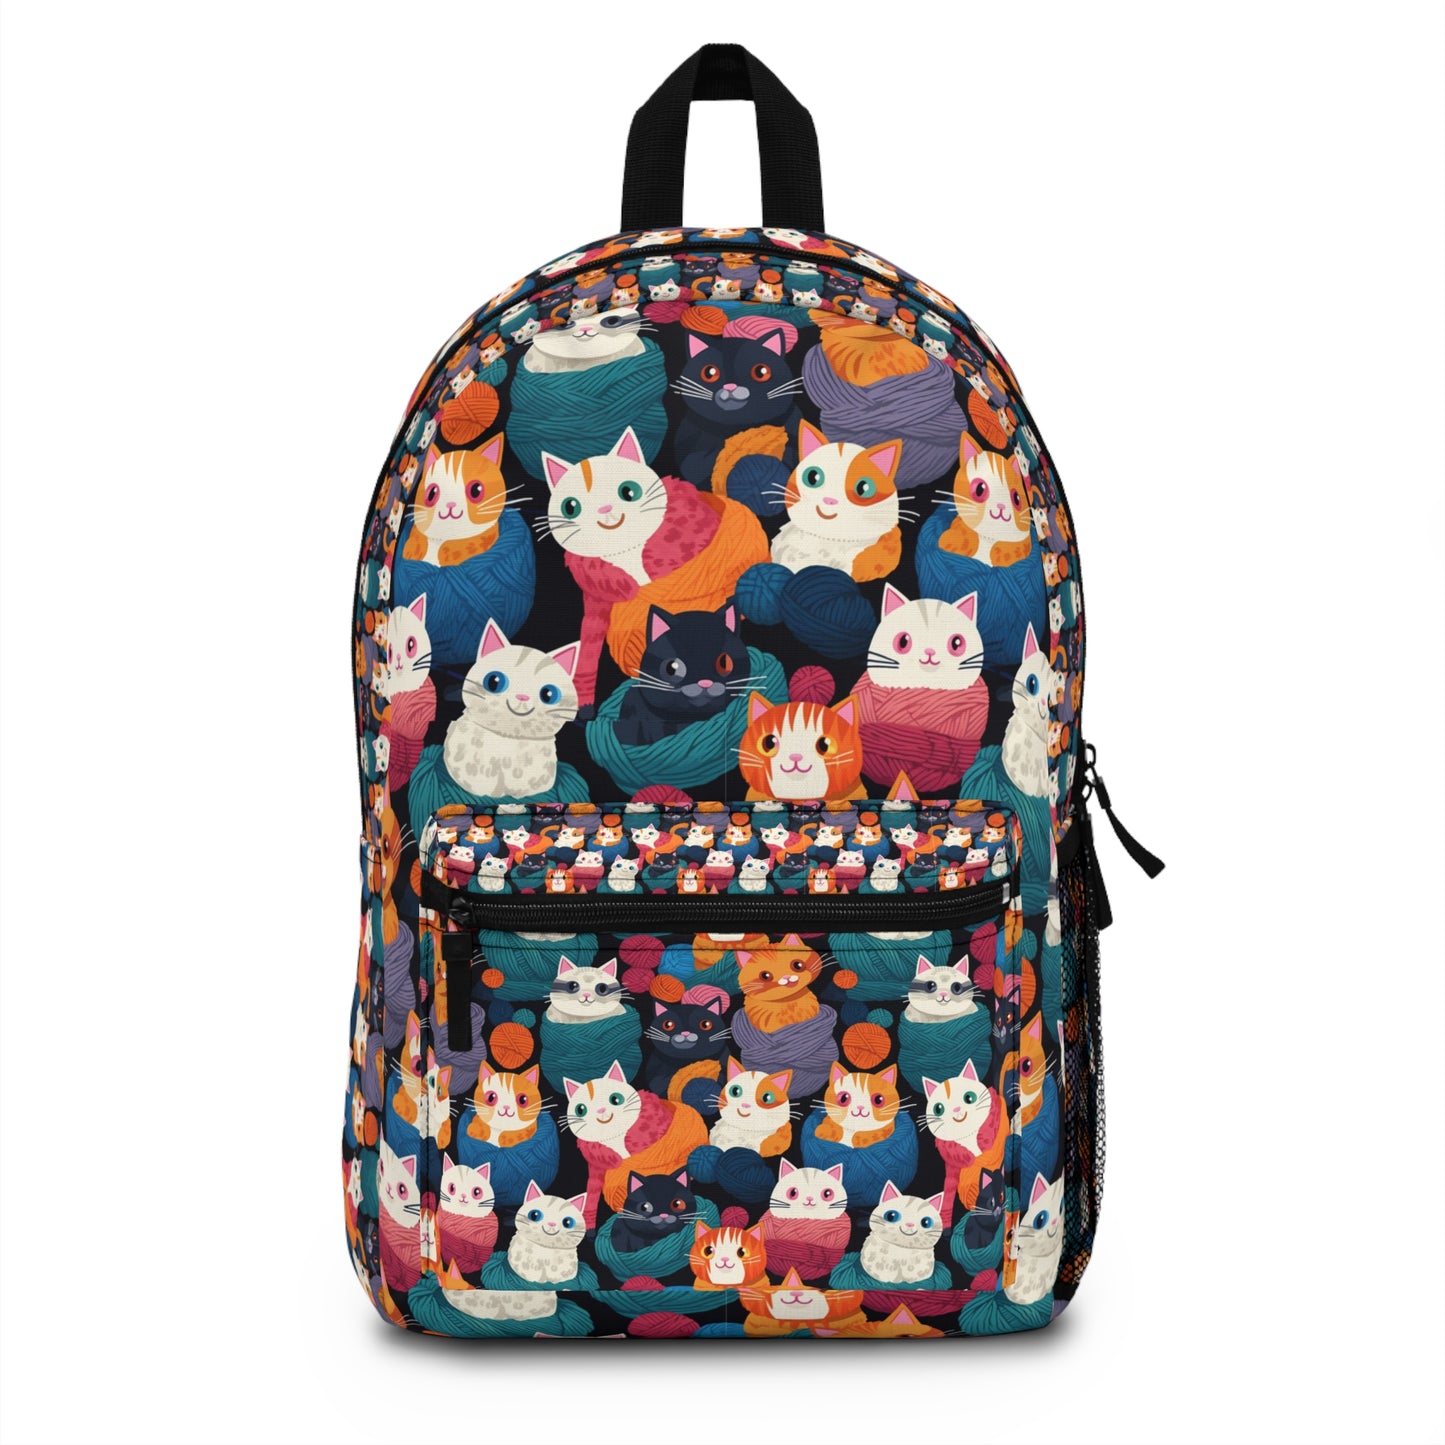 Adorable Cat and Yarn Backpack